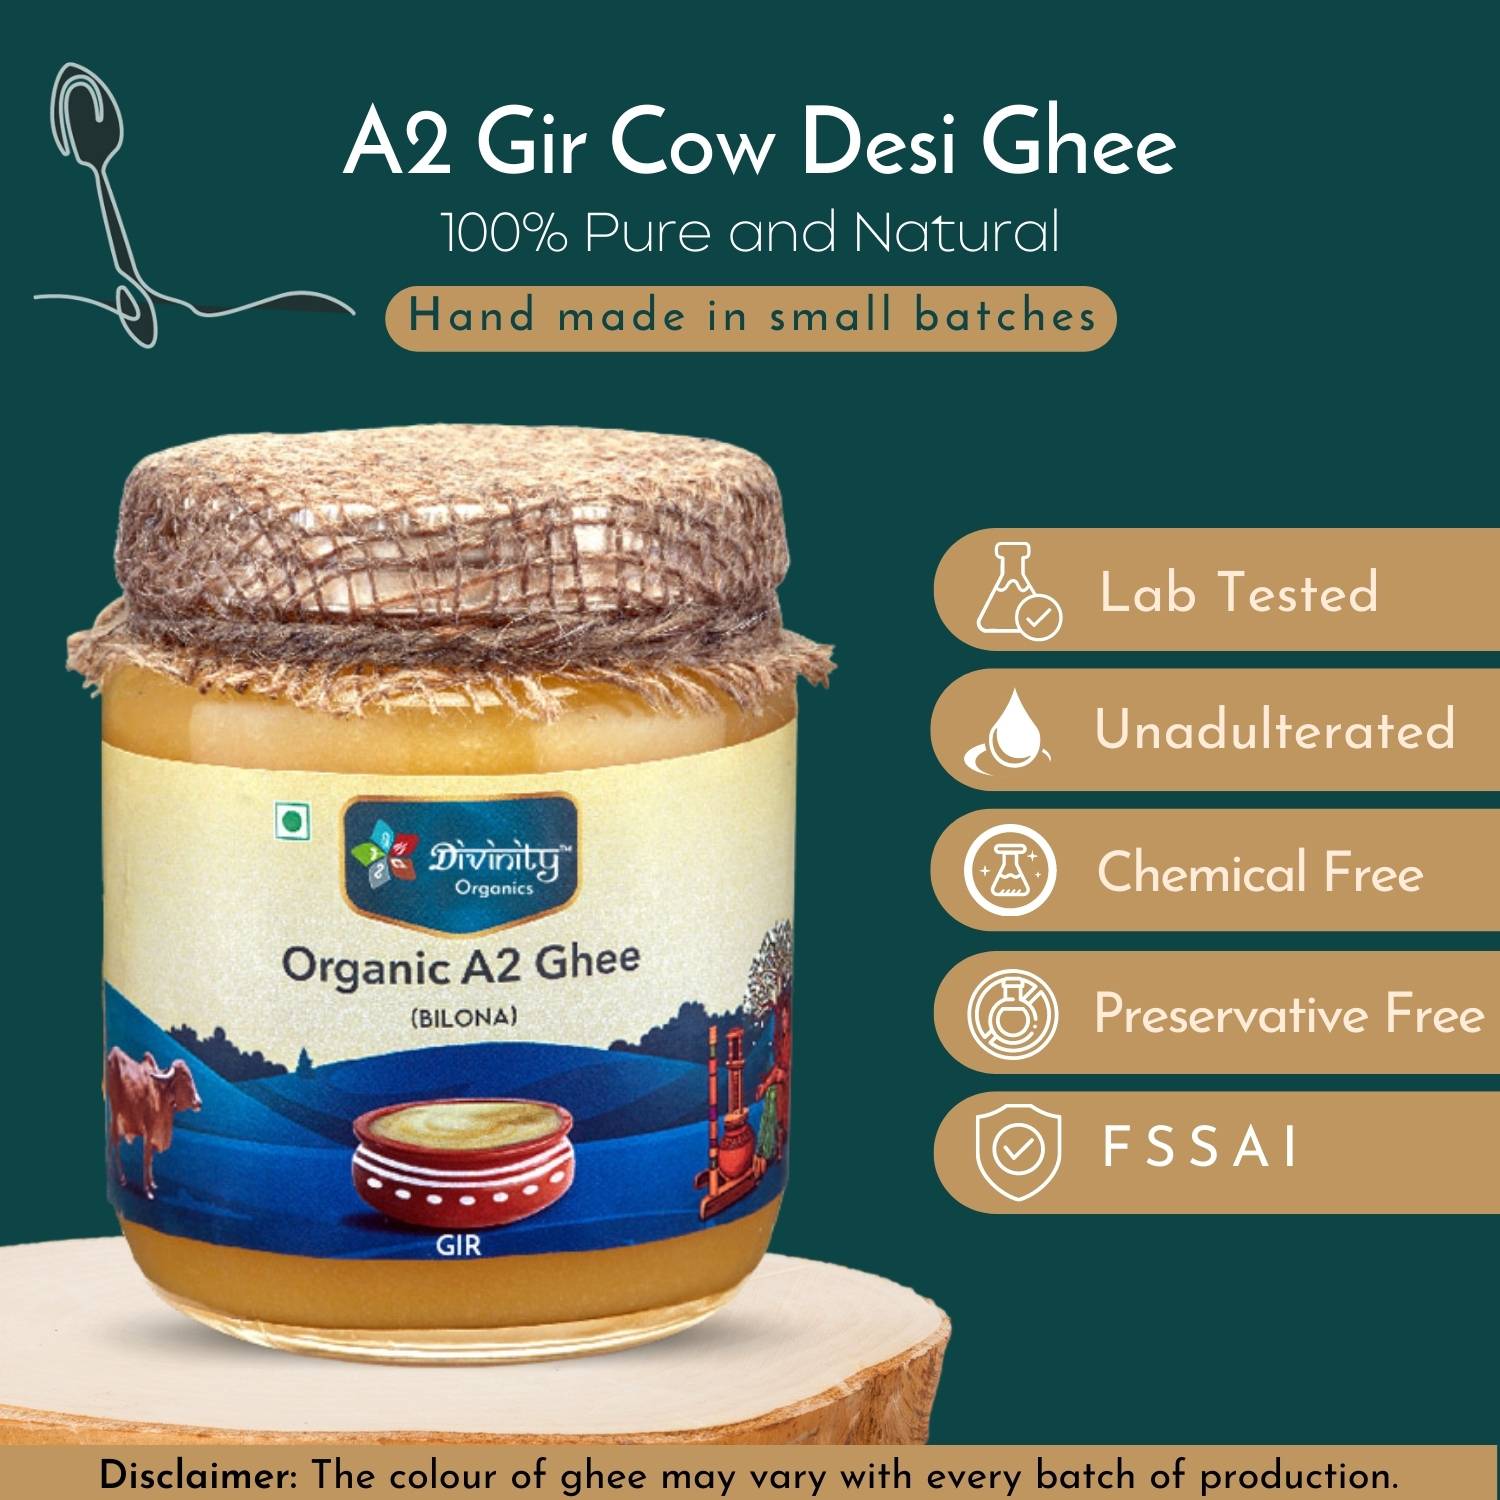 Divinity Organics A2 Cow Ghee Gir  Quality - 100% pure and natural